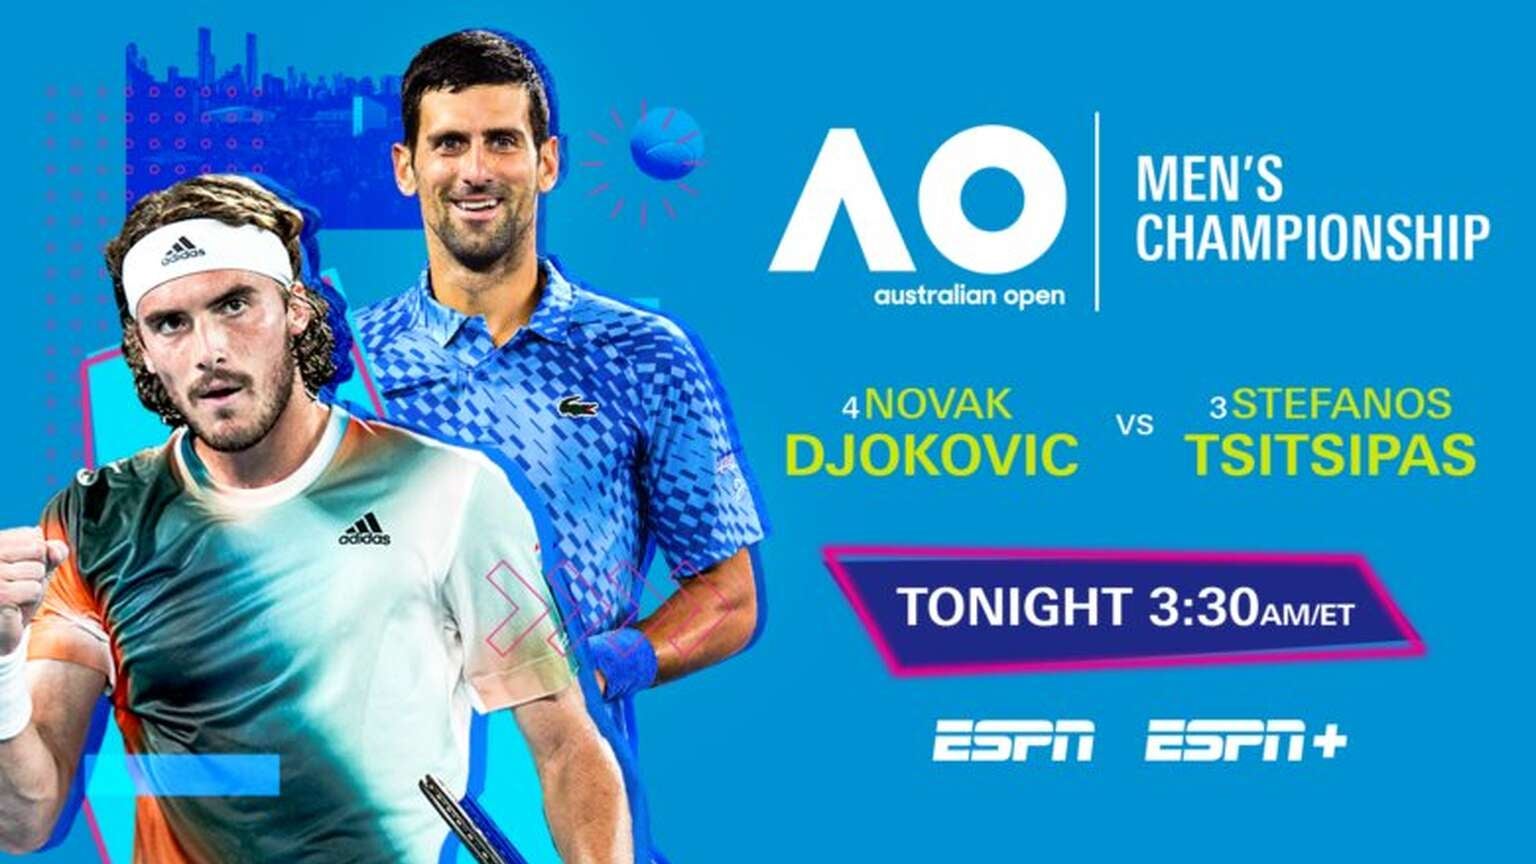 How to Watch The 2023 Australian Open Men's Finals Live Online Without